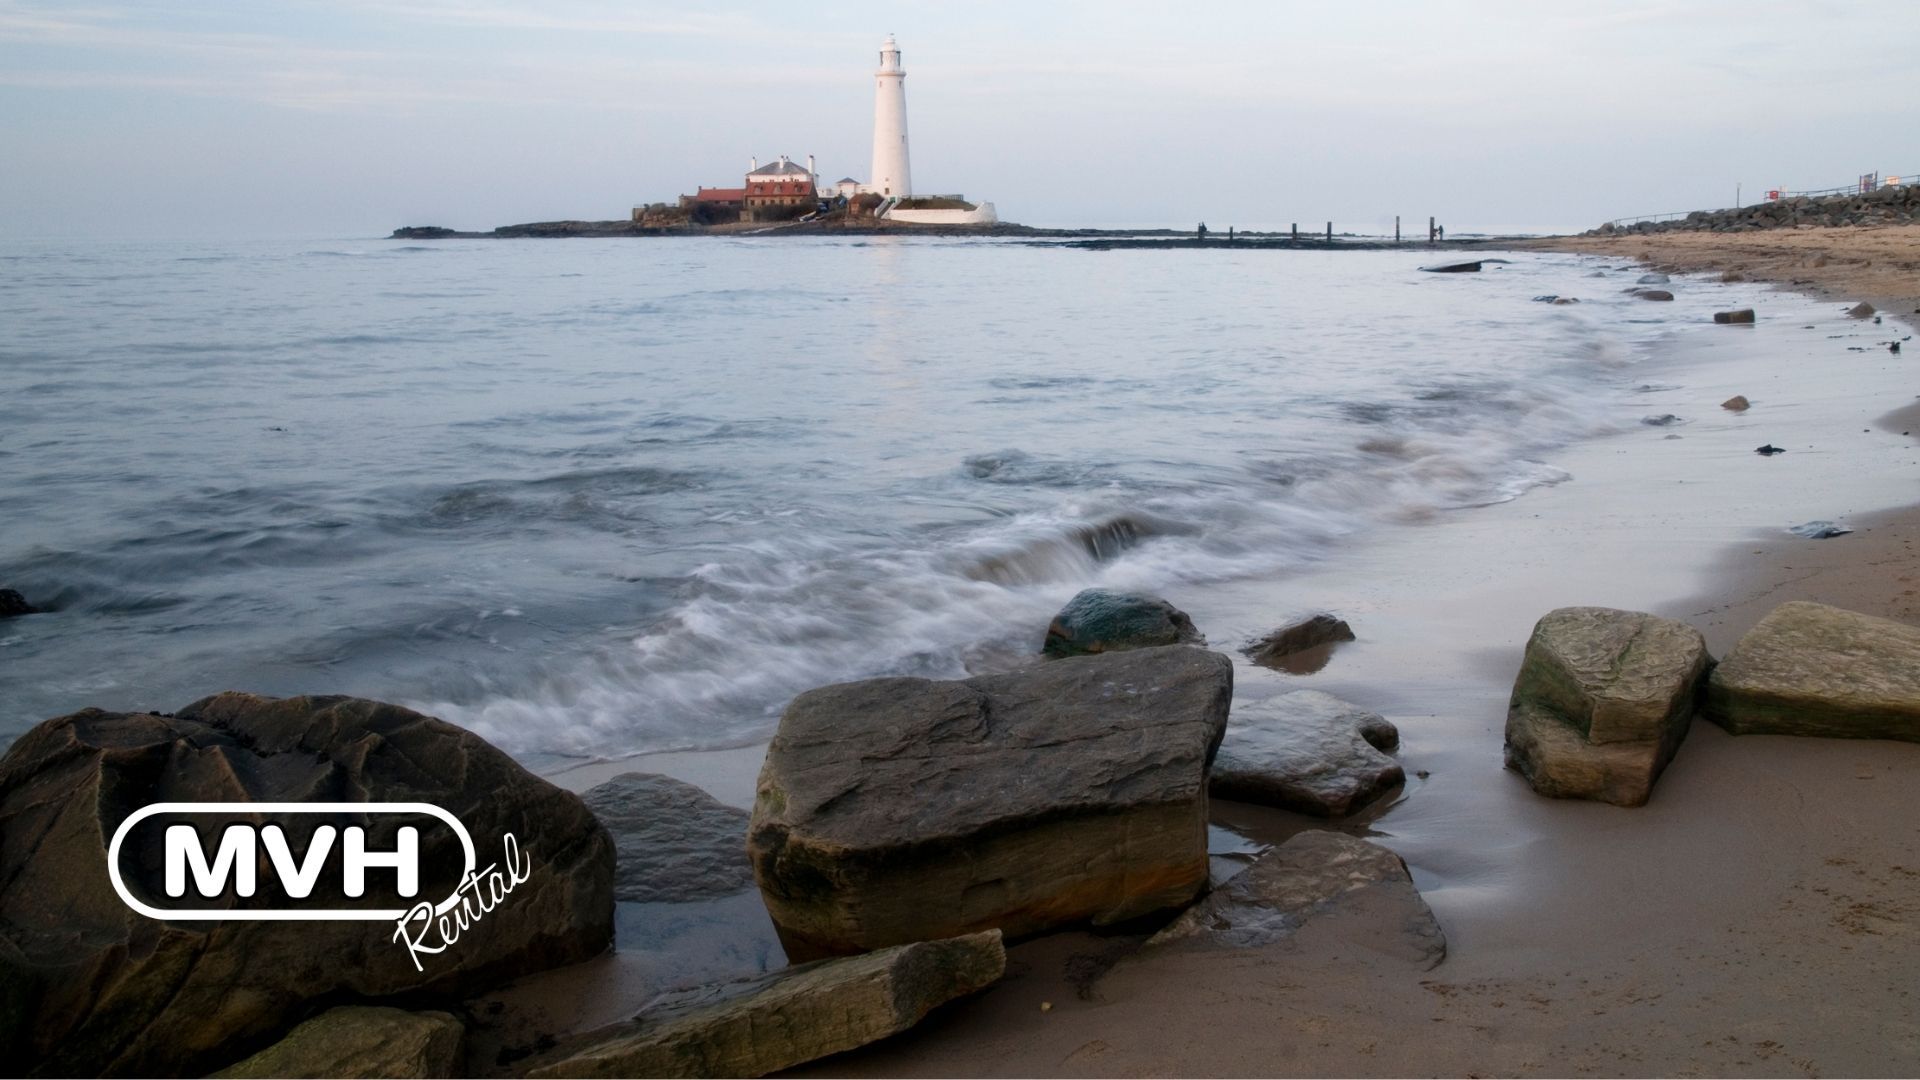 Fancy some seaside fun? Explore 4 magical seaside towns in Northumberland and Tyne and Wear.
